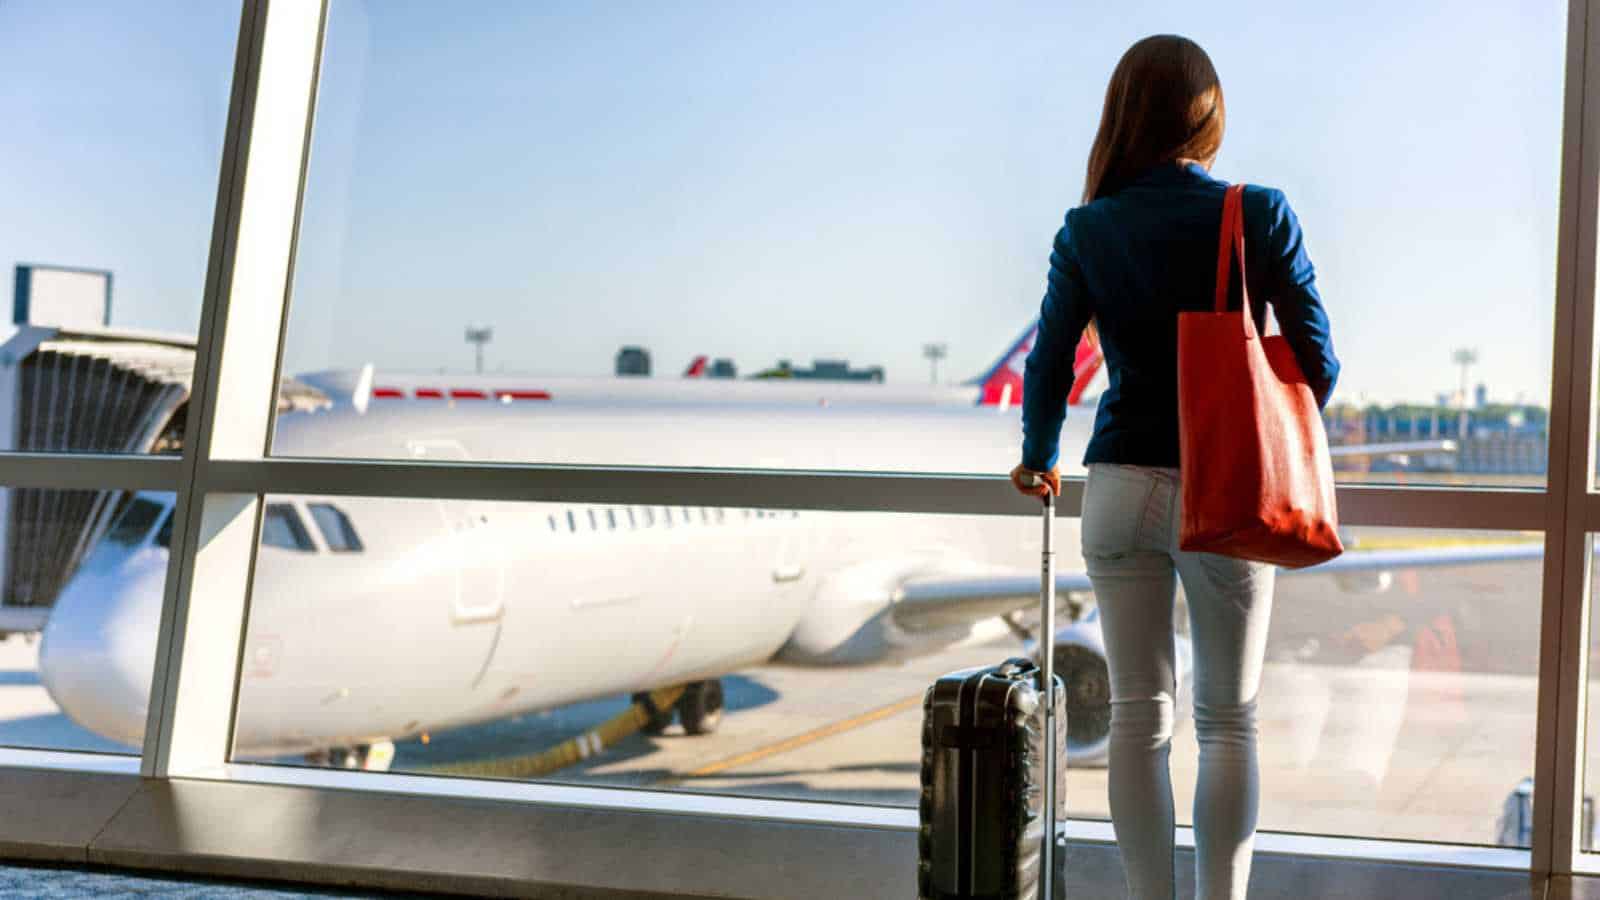 Travel tourist standing with luggage watching sunset at airport window. Unrecognizable woman looking at lounge looking at airplanes while waiting at boarding gate before departure. Travel lifestyle.